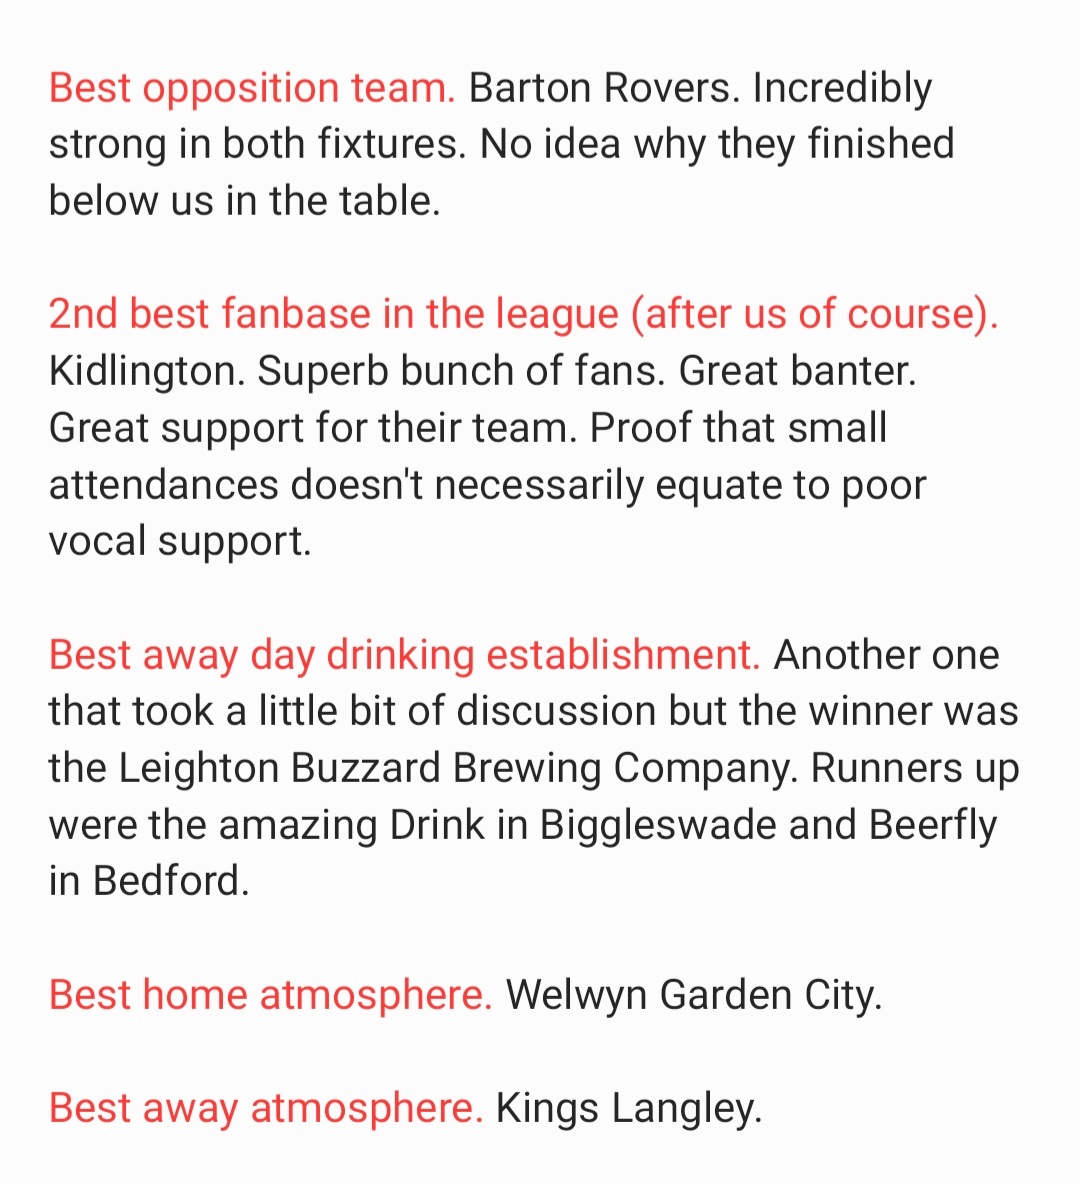 Now that the @hadleyfc season is over, here's a little season review from the perspective of us fans! Shoutouts to @BiggleswadeFc1 @kidlingtonfc_ and @bartonroversfc, plus @Beerflyshop @drinkbiggles @LB_Beer.